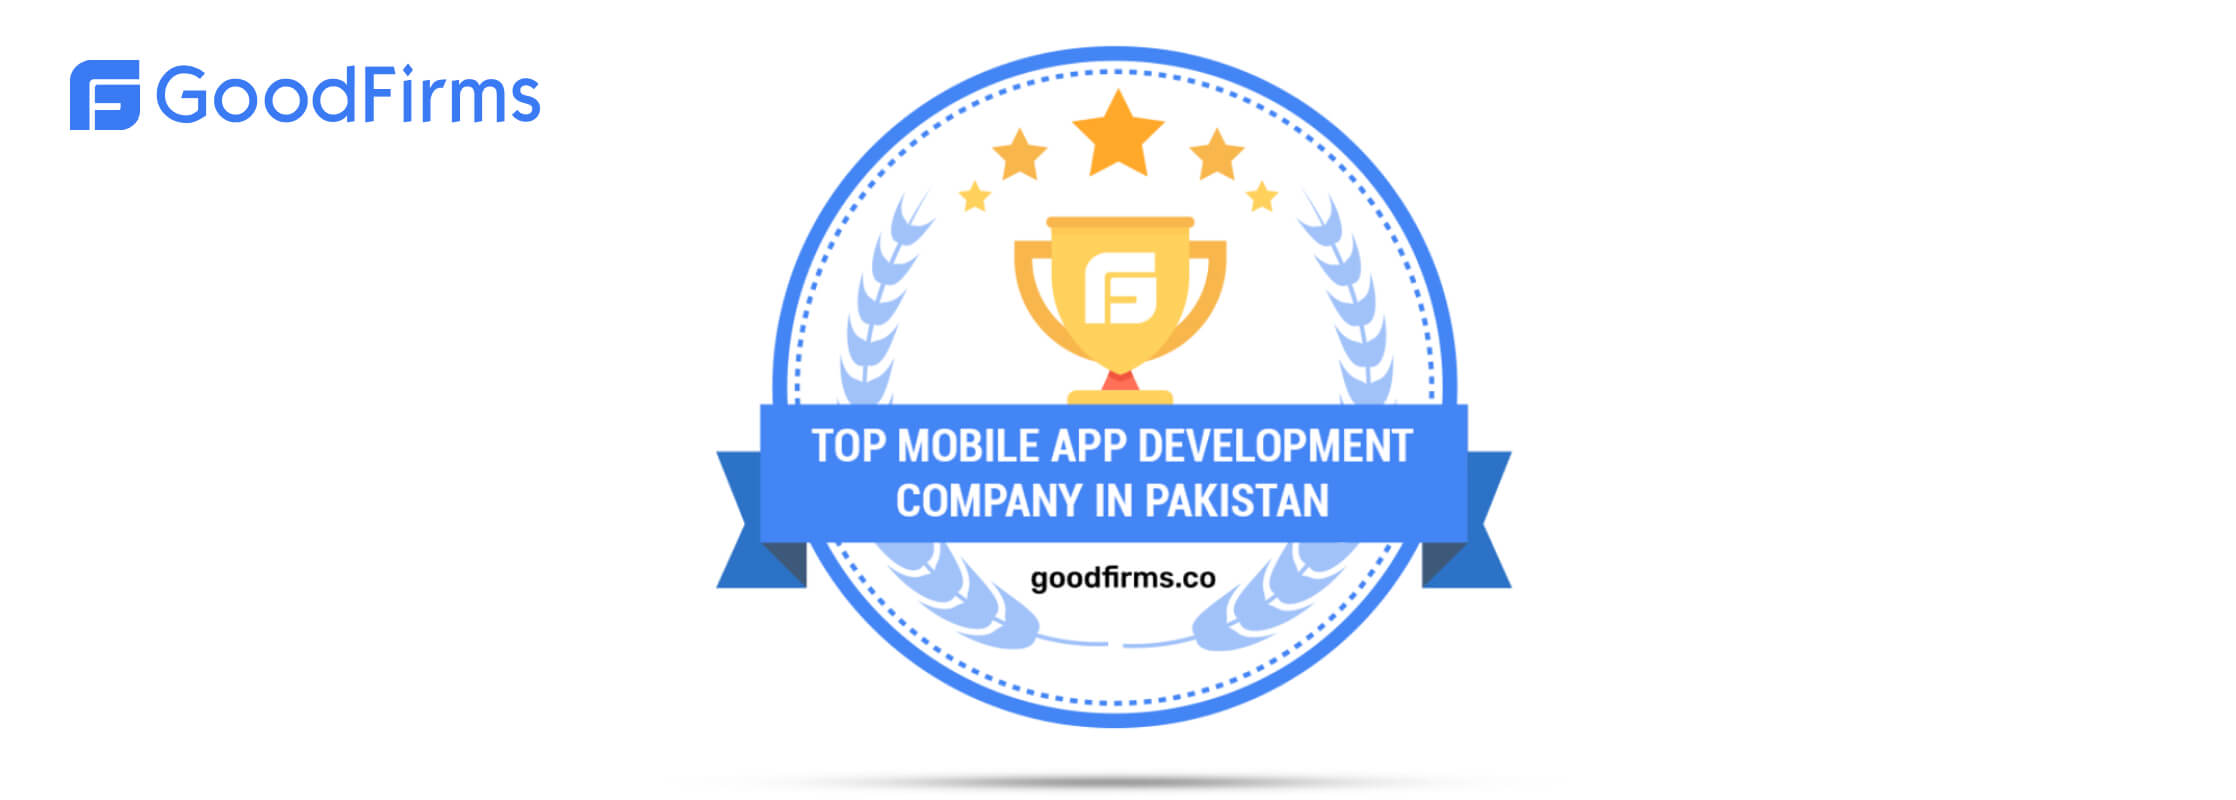 GoodFirms Highly Recommends DevCrew for their Full-Scale Web and Mobile App Development Services